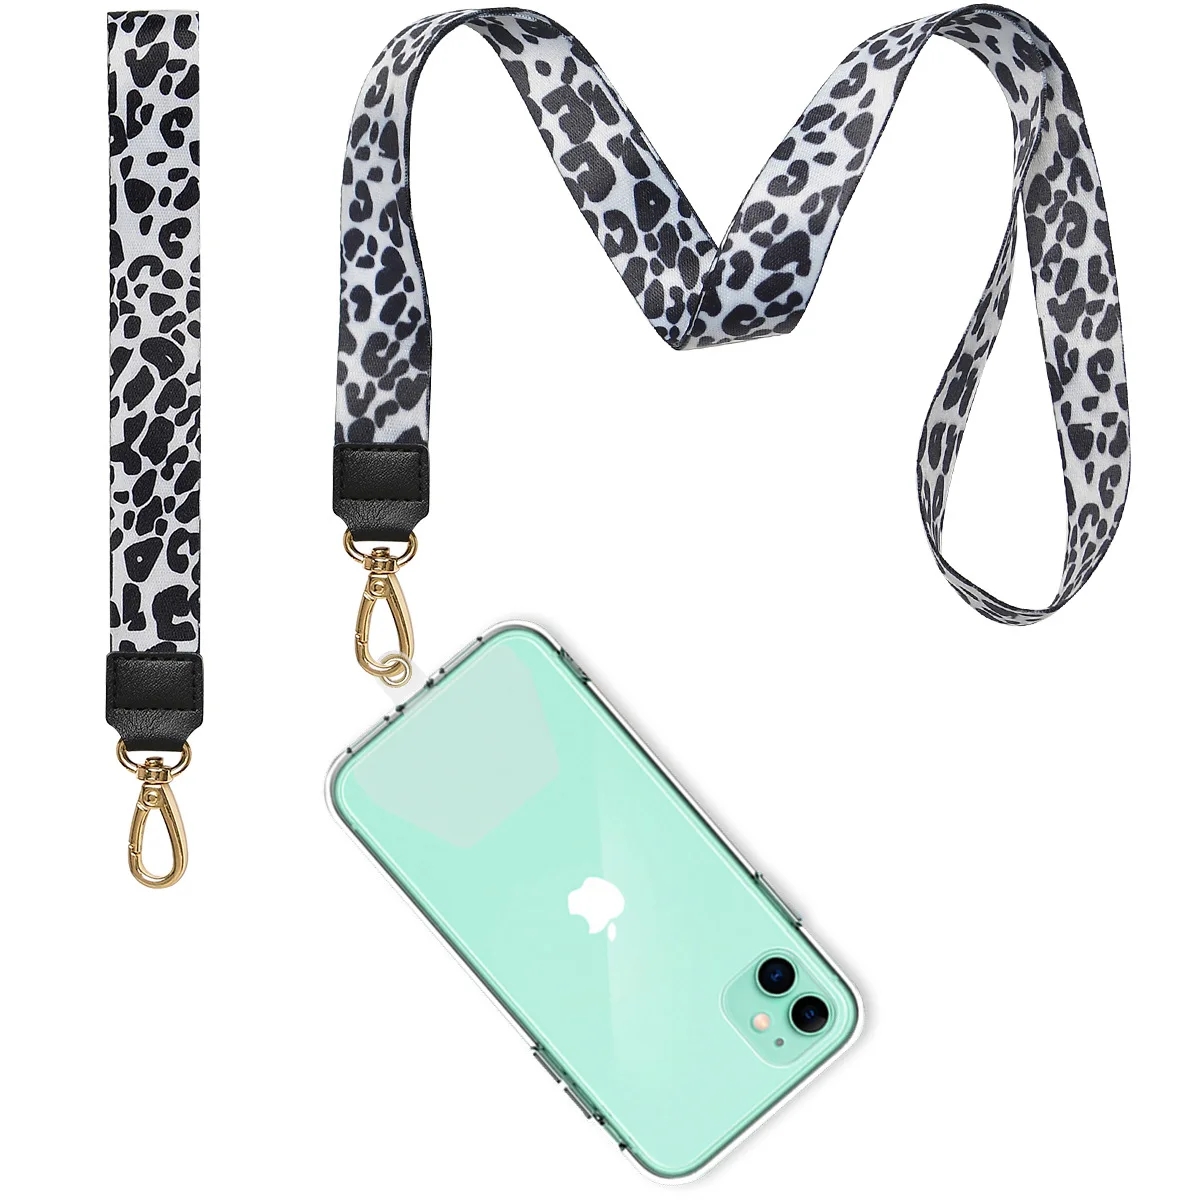 

Anti-lost Lanyard Strap Phone, Universal Phone Lanyard, Detachable Colorful Neck Cord, Safety Tether Keychain Chain Rope Lanyard